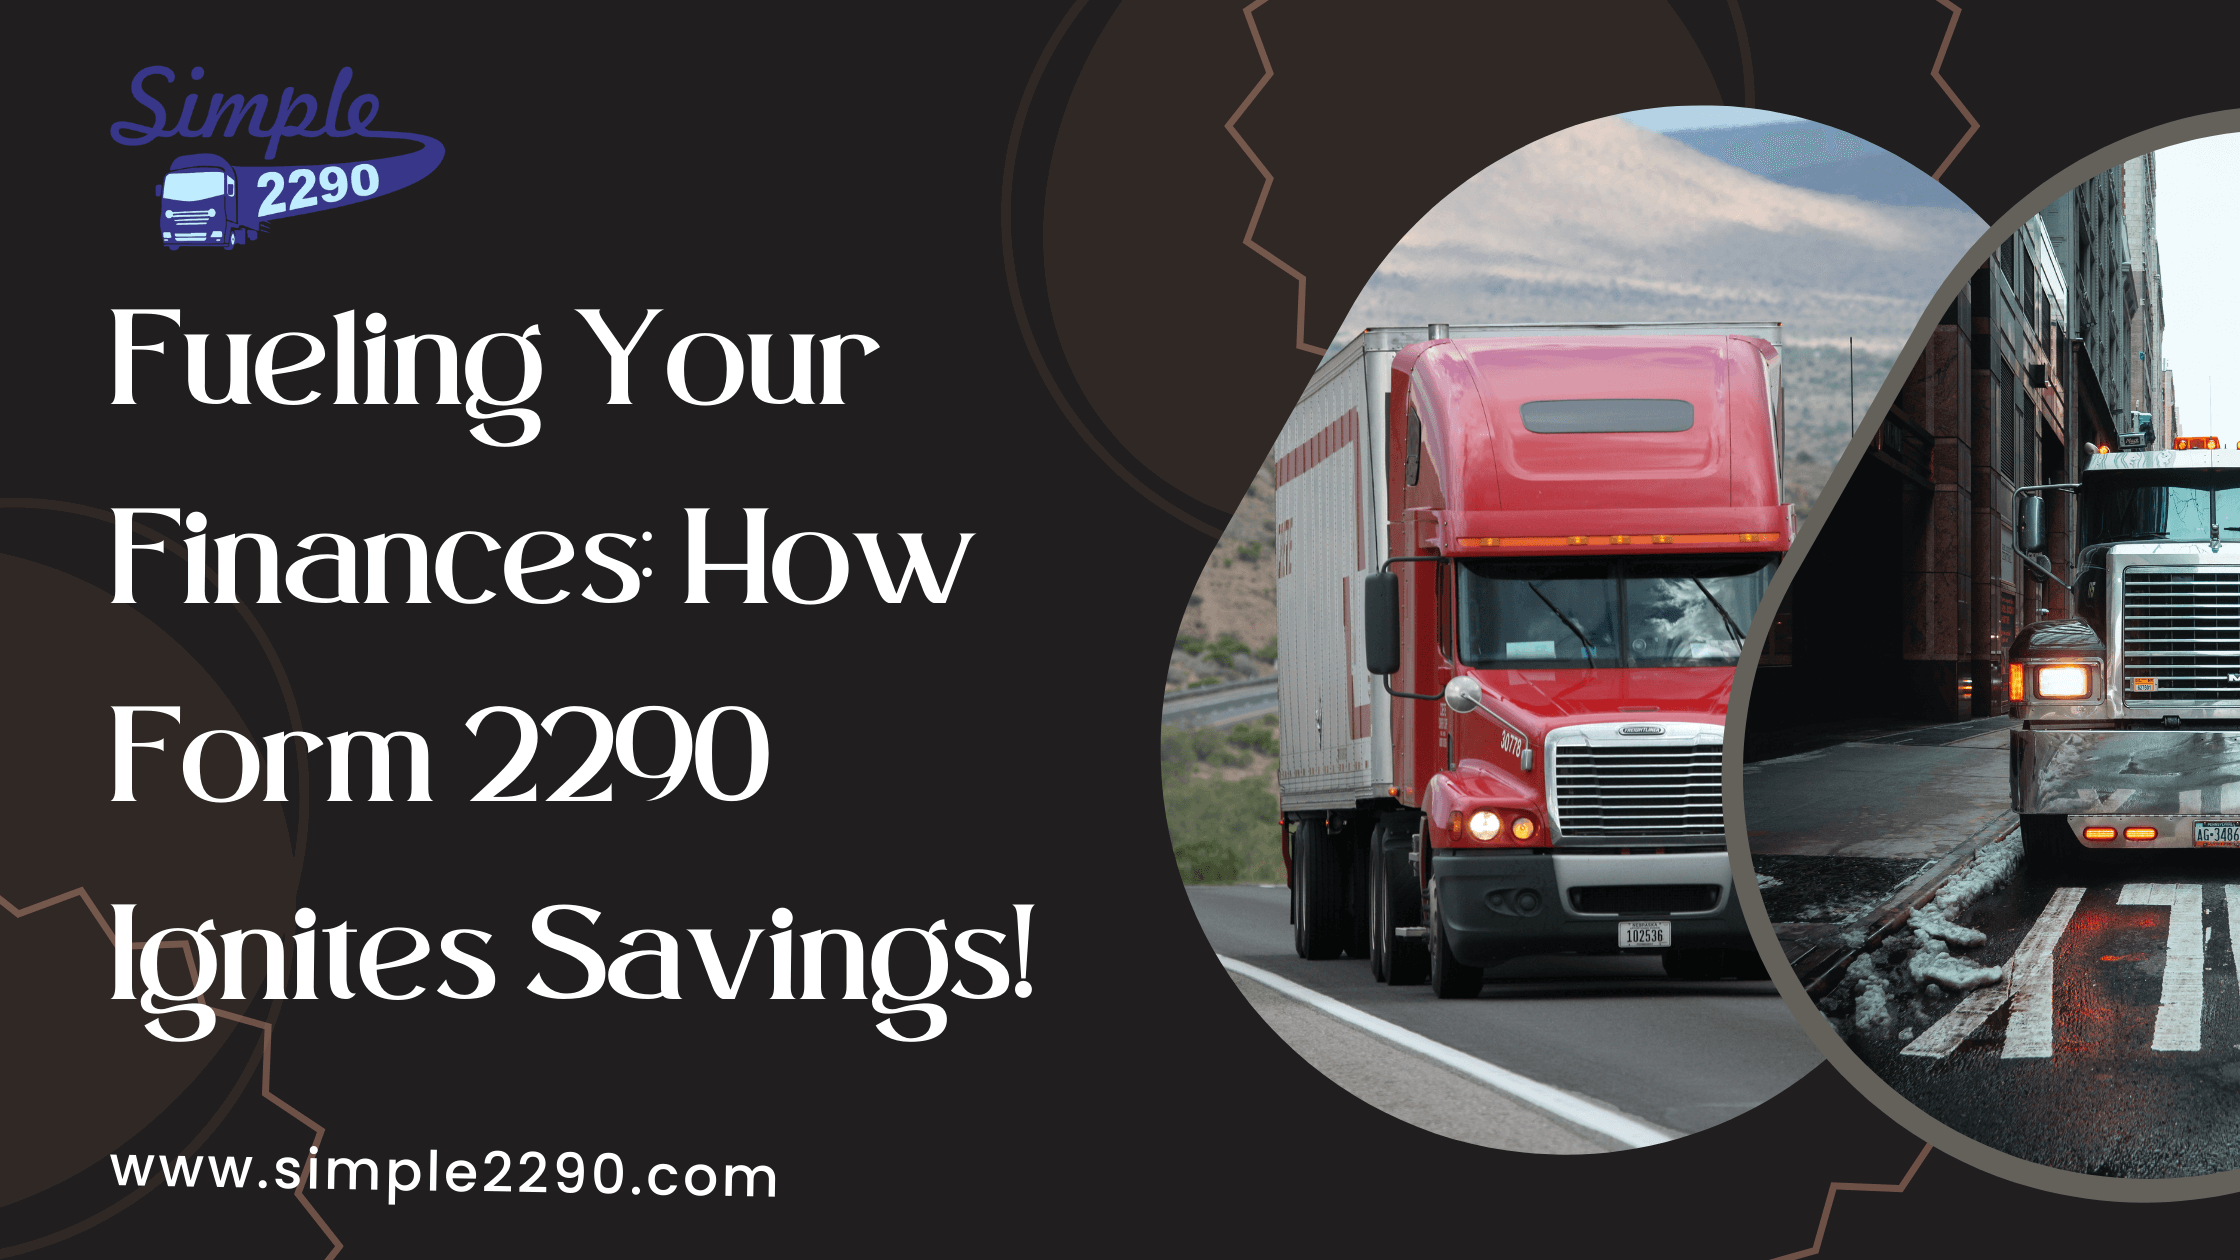 Fueling Your Finances: How Form 2290 Ignites Savings!